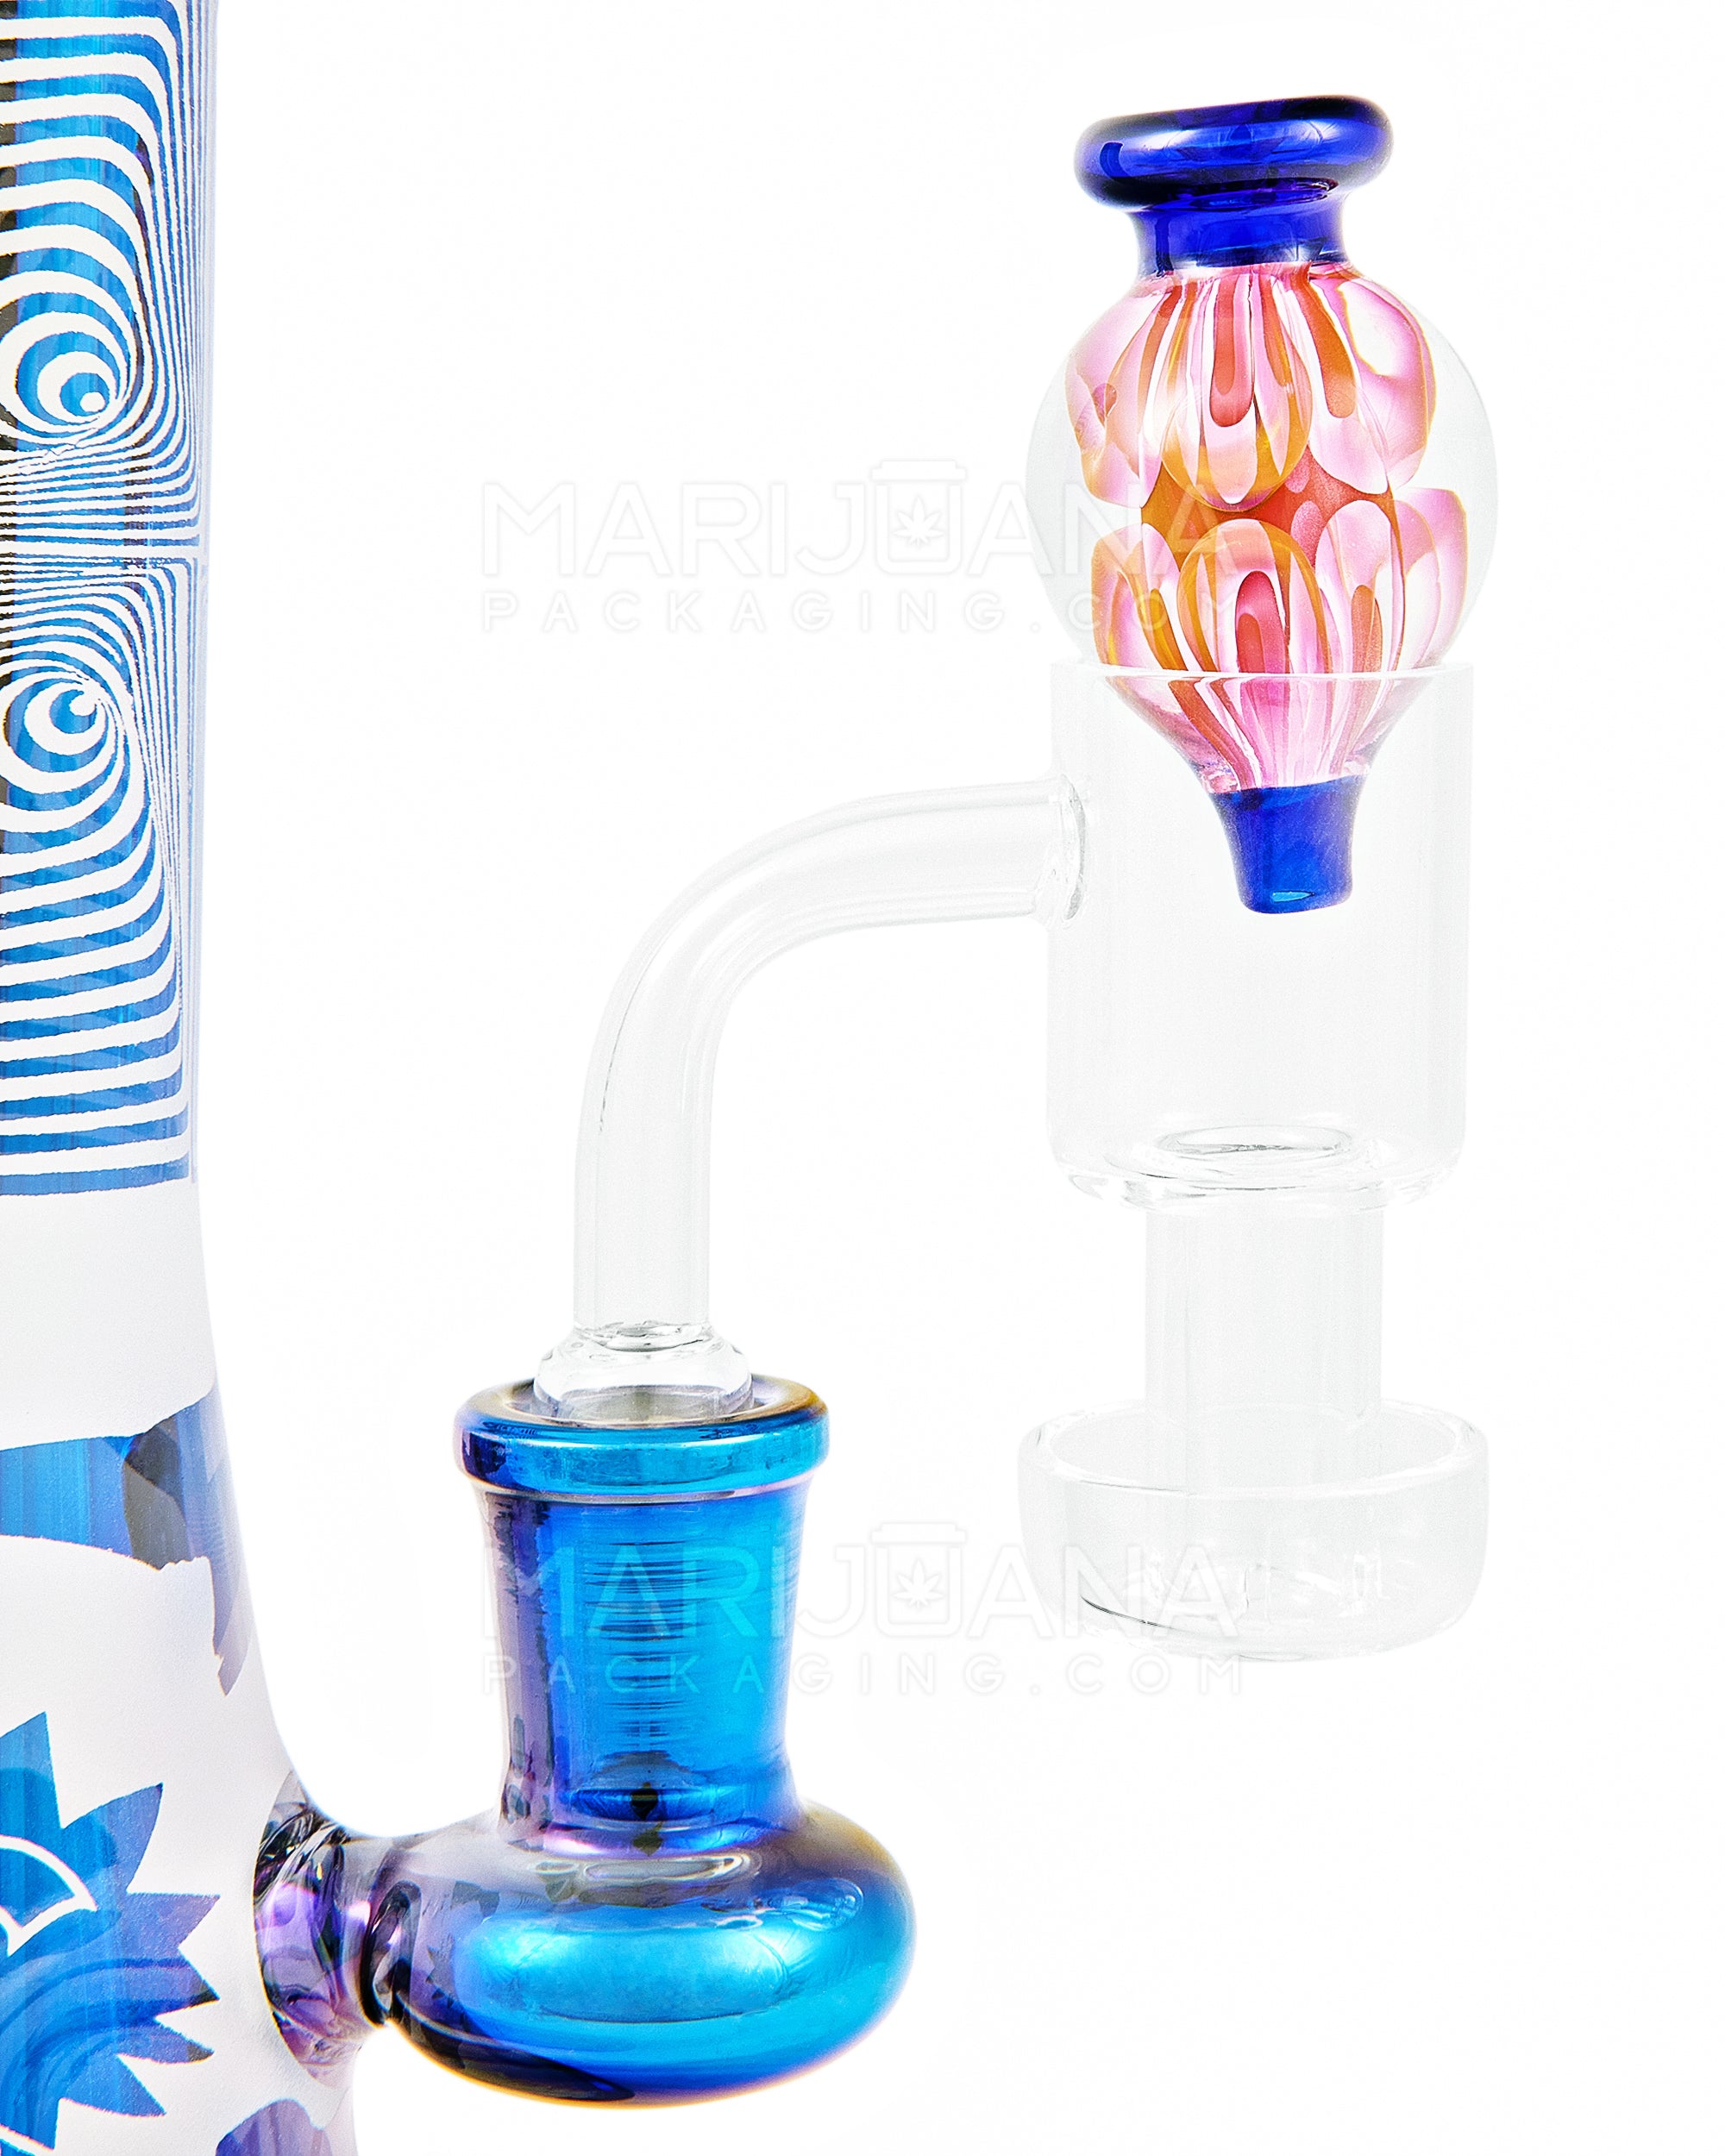 Fumed & Trapped Swirl Bubble Carb Cap | 25mm - Glass - Assorted - 7